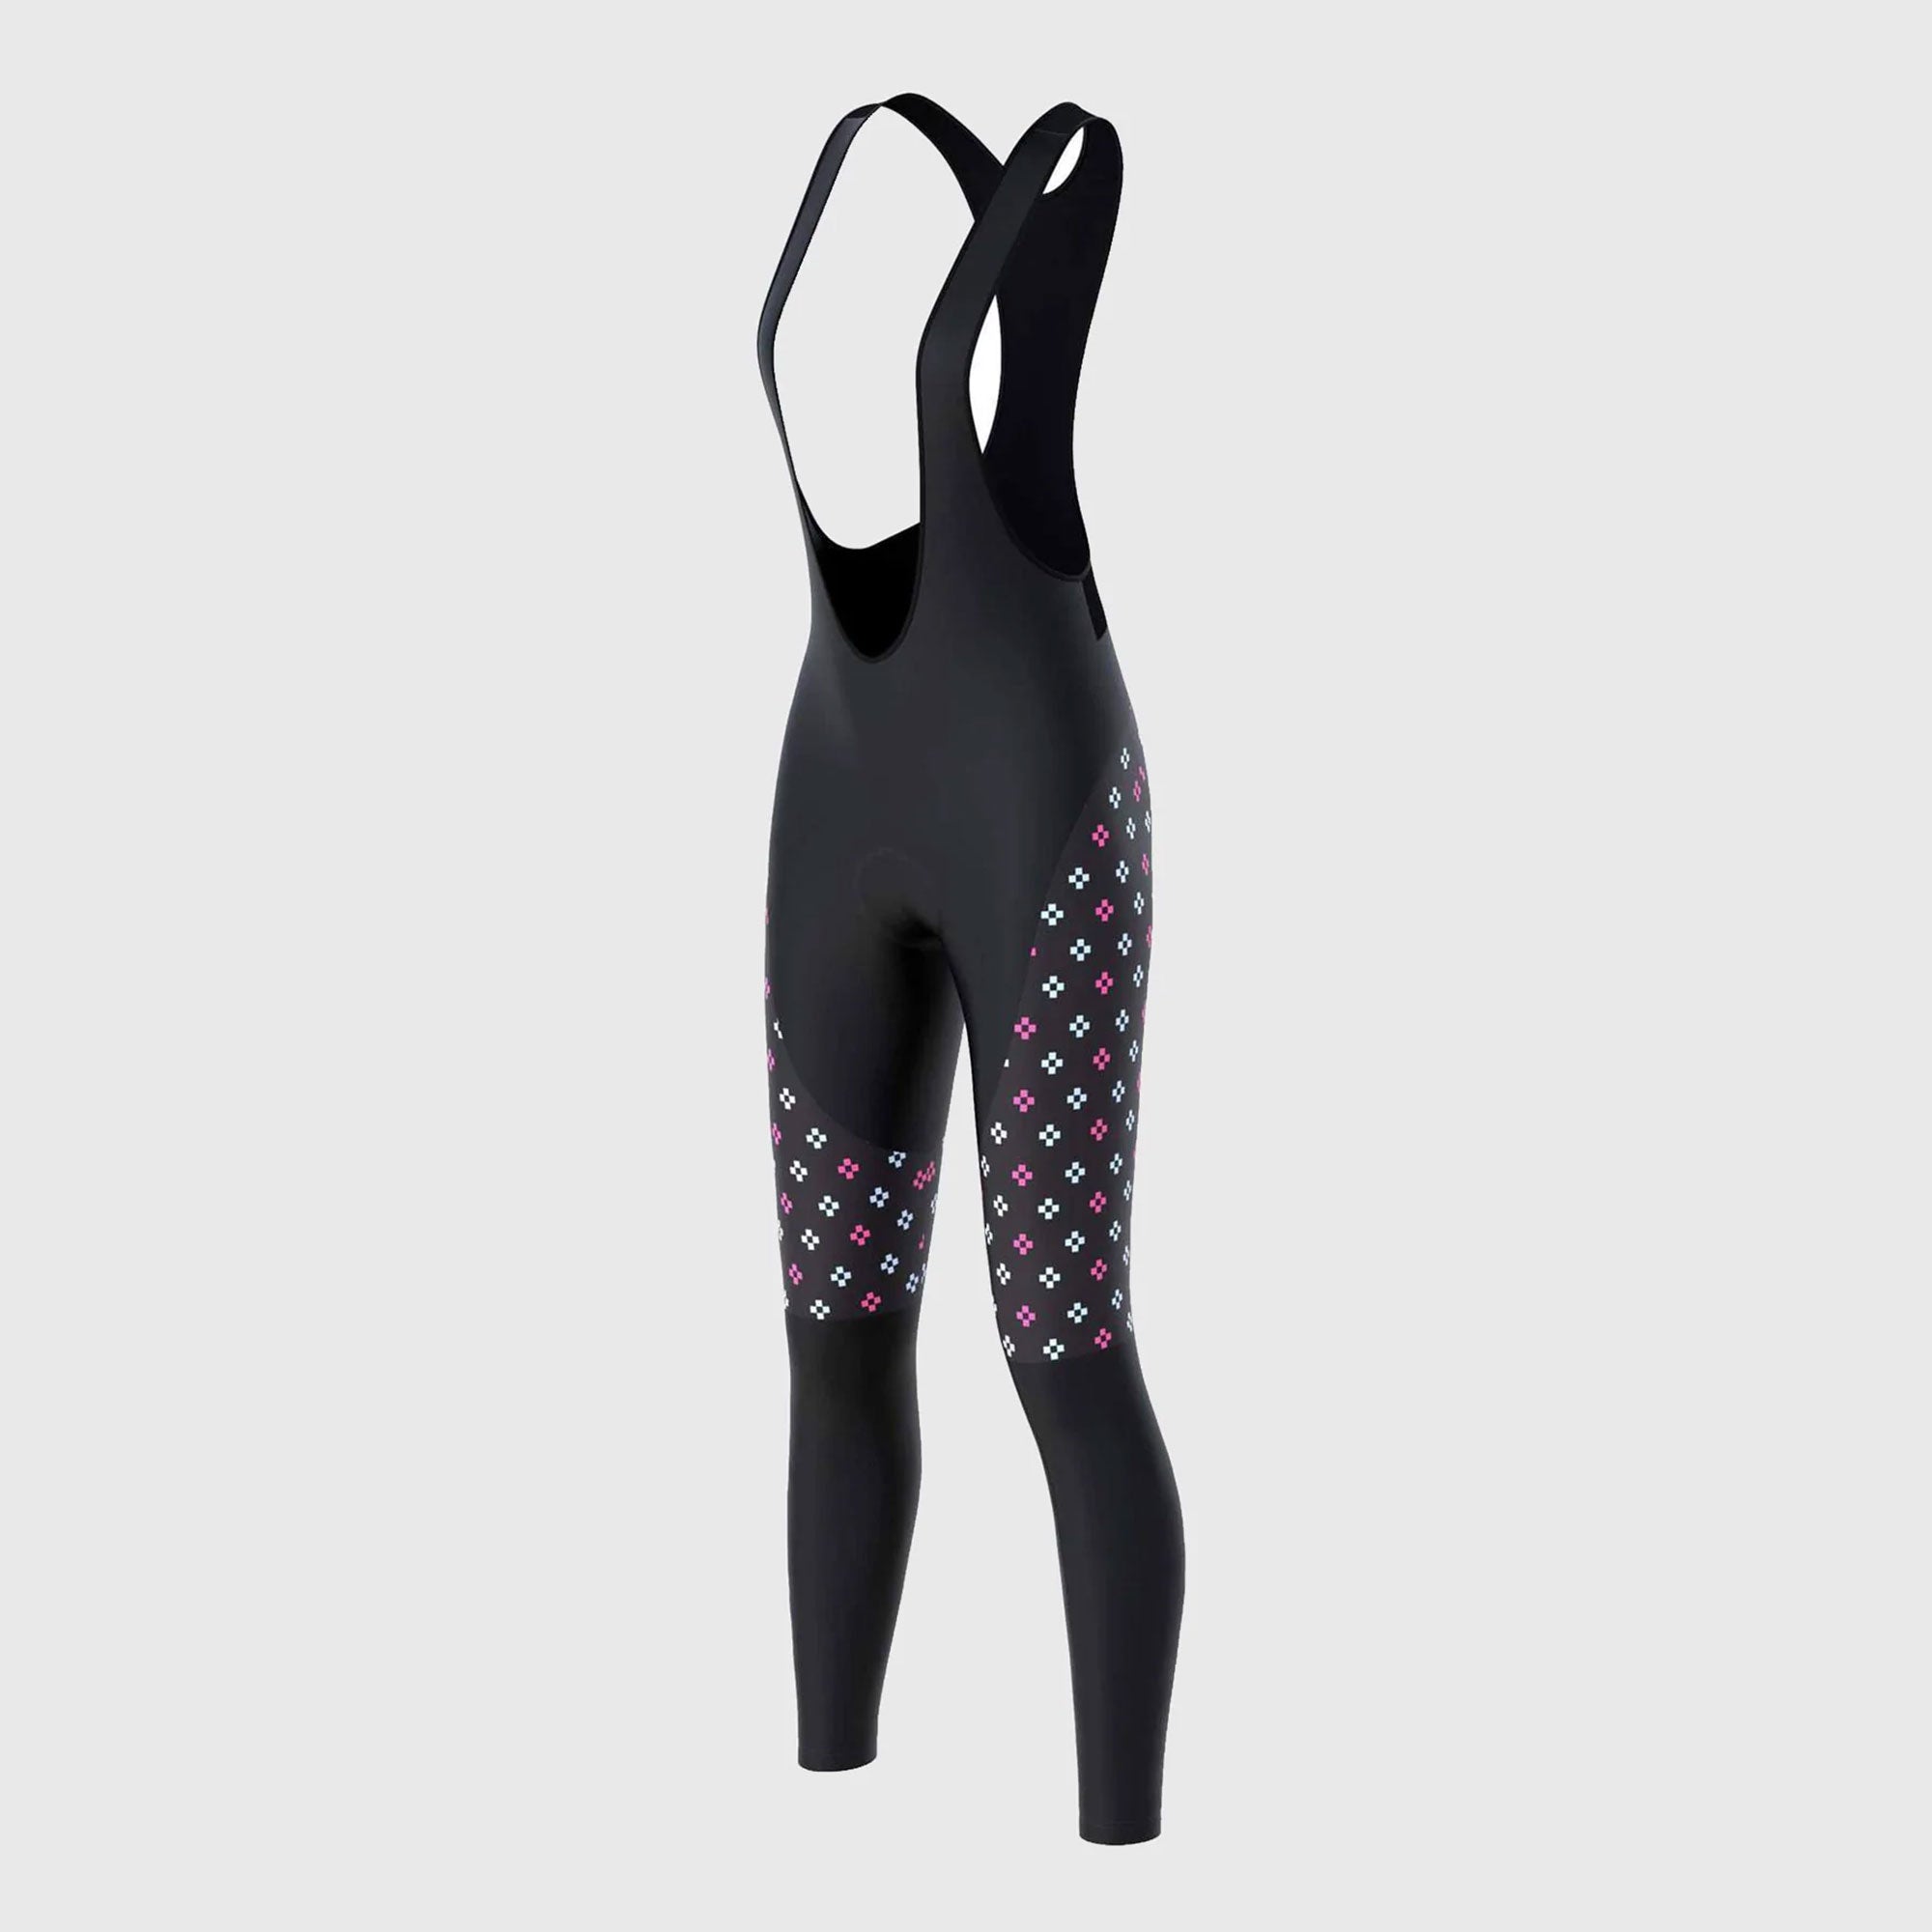 Women's Padded Cycling Tights